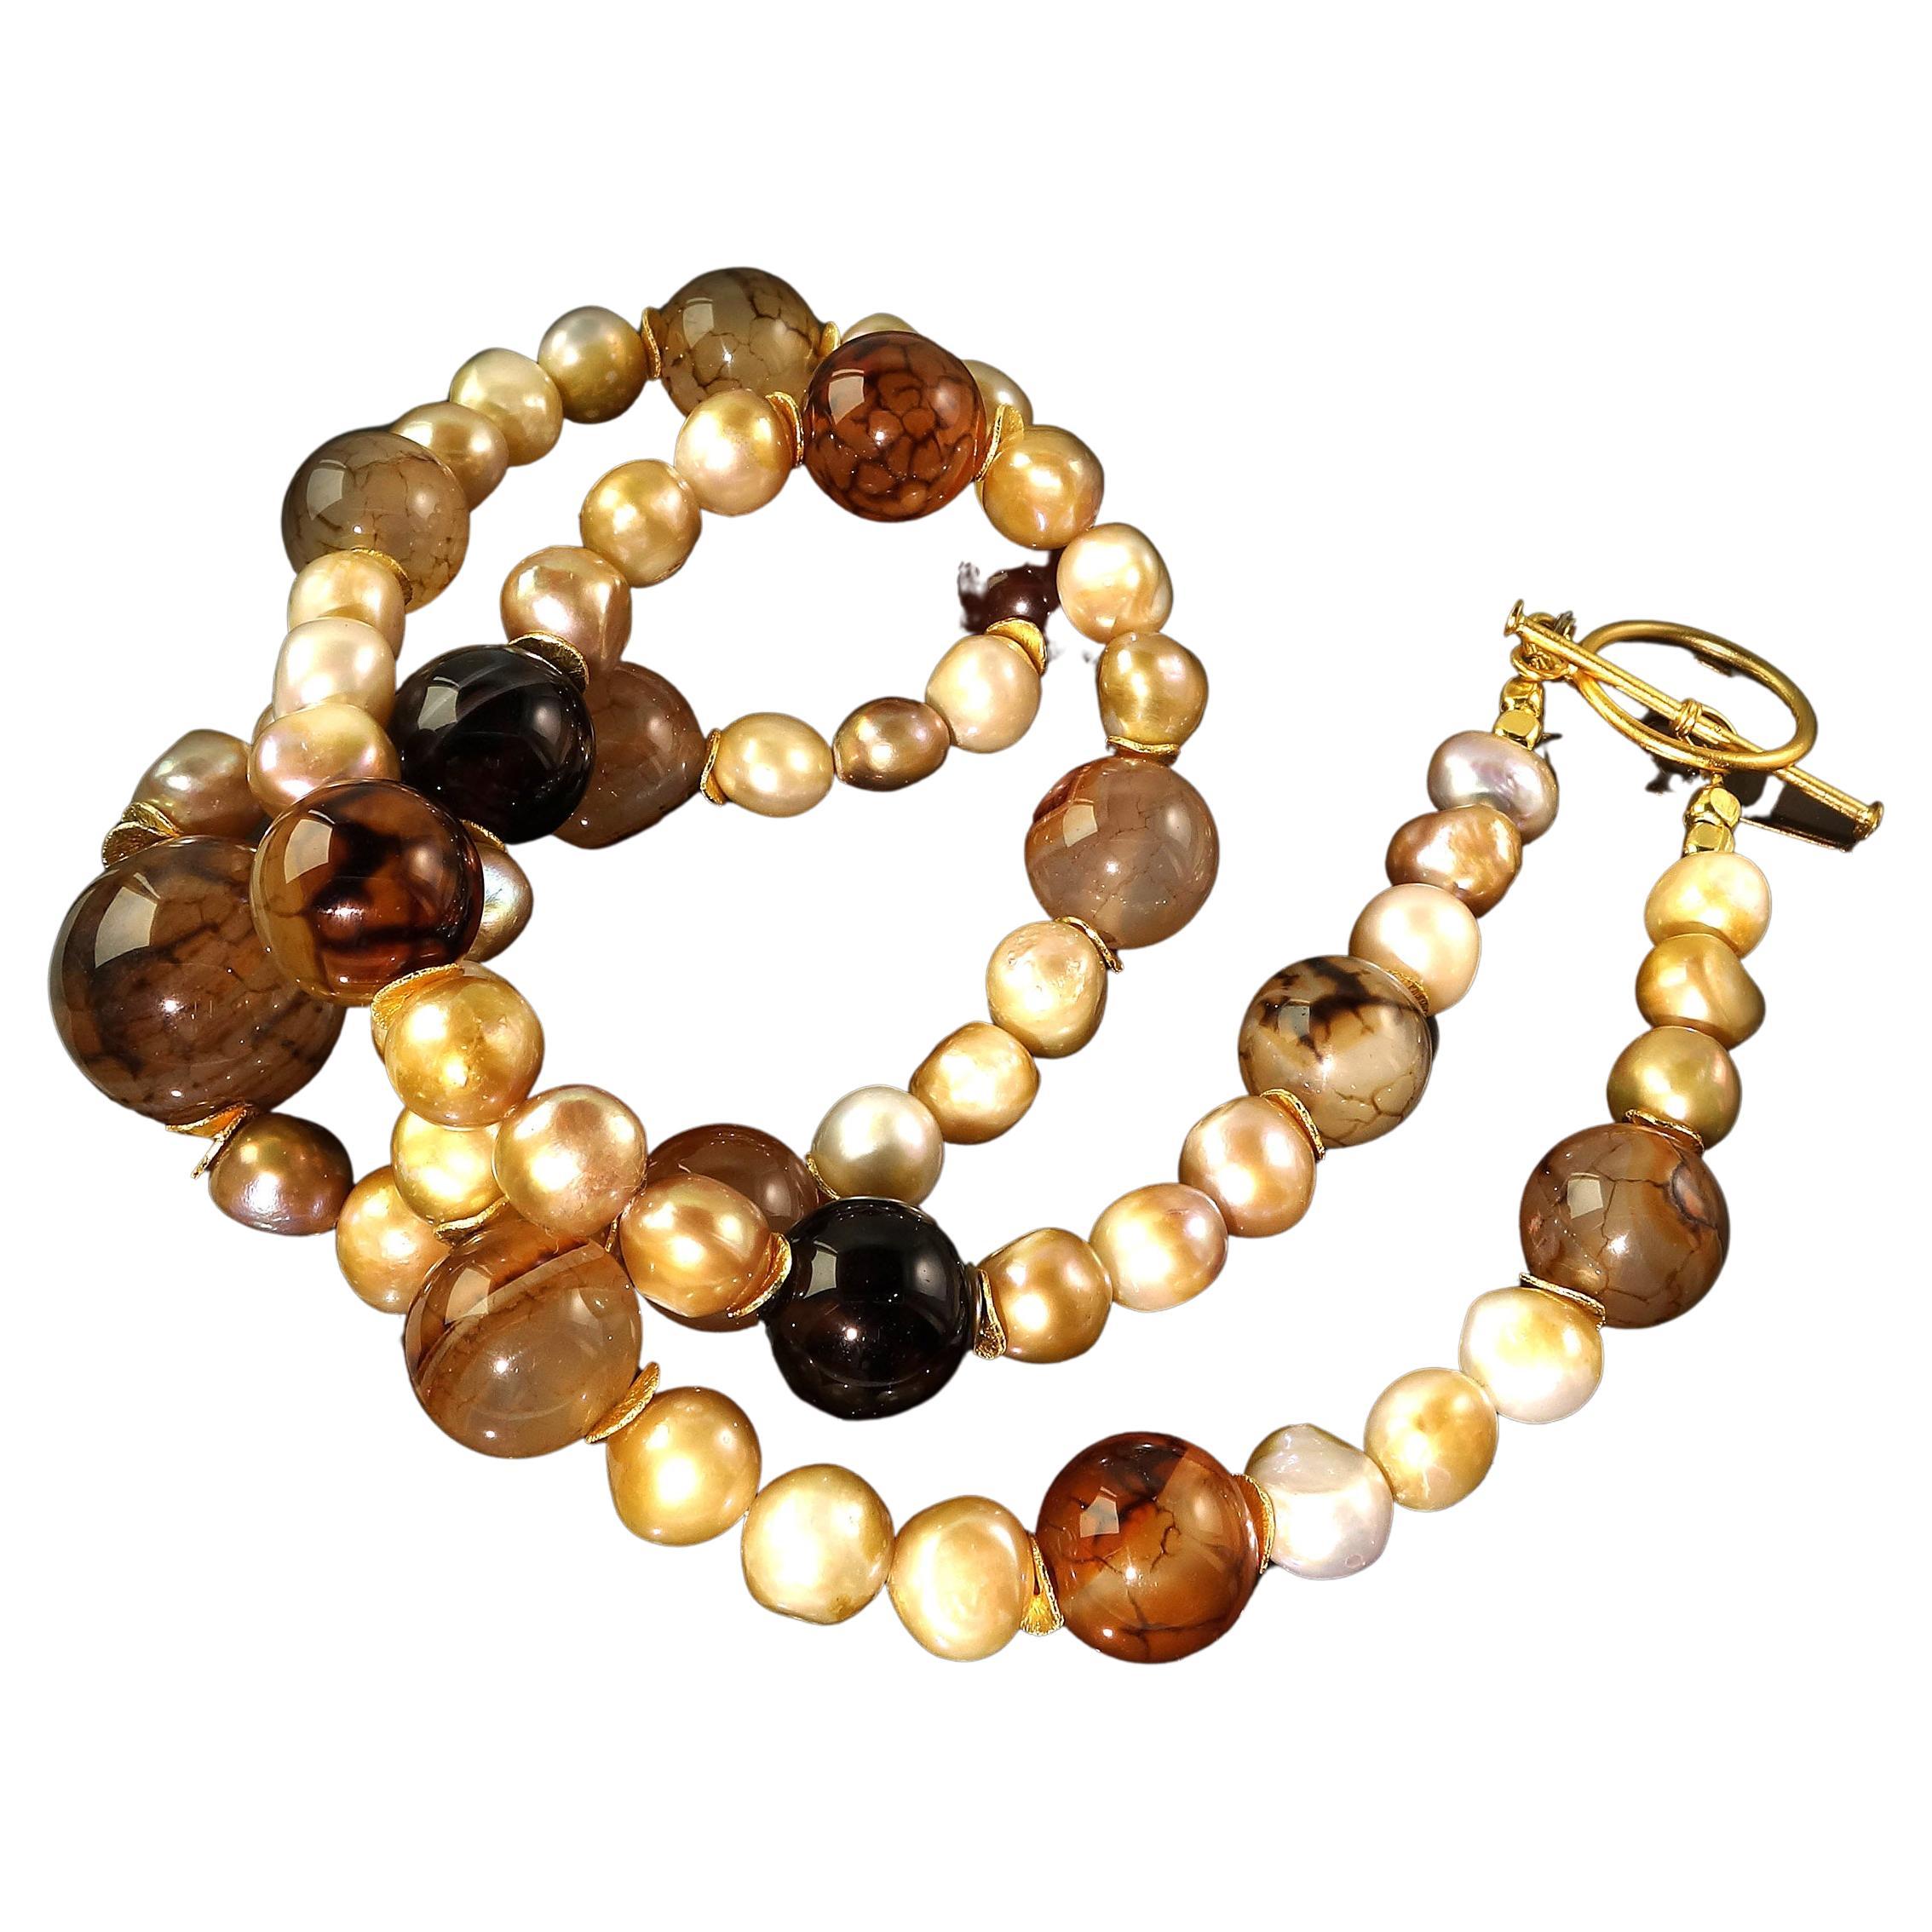 Own the jewelry you wish for

Handmade, elegant necklace of Spiderweb Jasper and Freshwater Pearls. The Pearls are in tones of gray, gold, and cream to enhance the brown tones in the Spiderweb Jasper. Each Jasper station is accented with gold tone